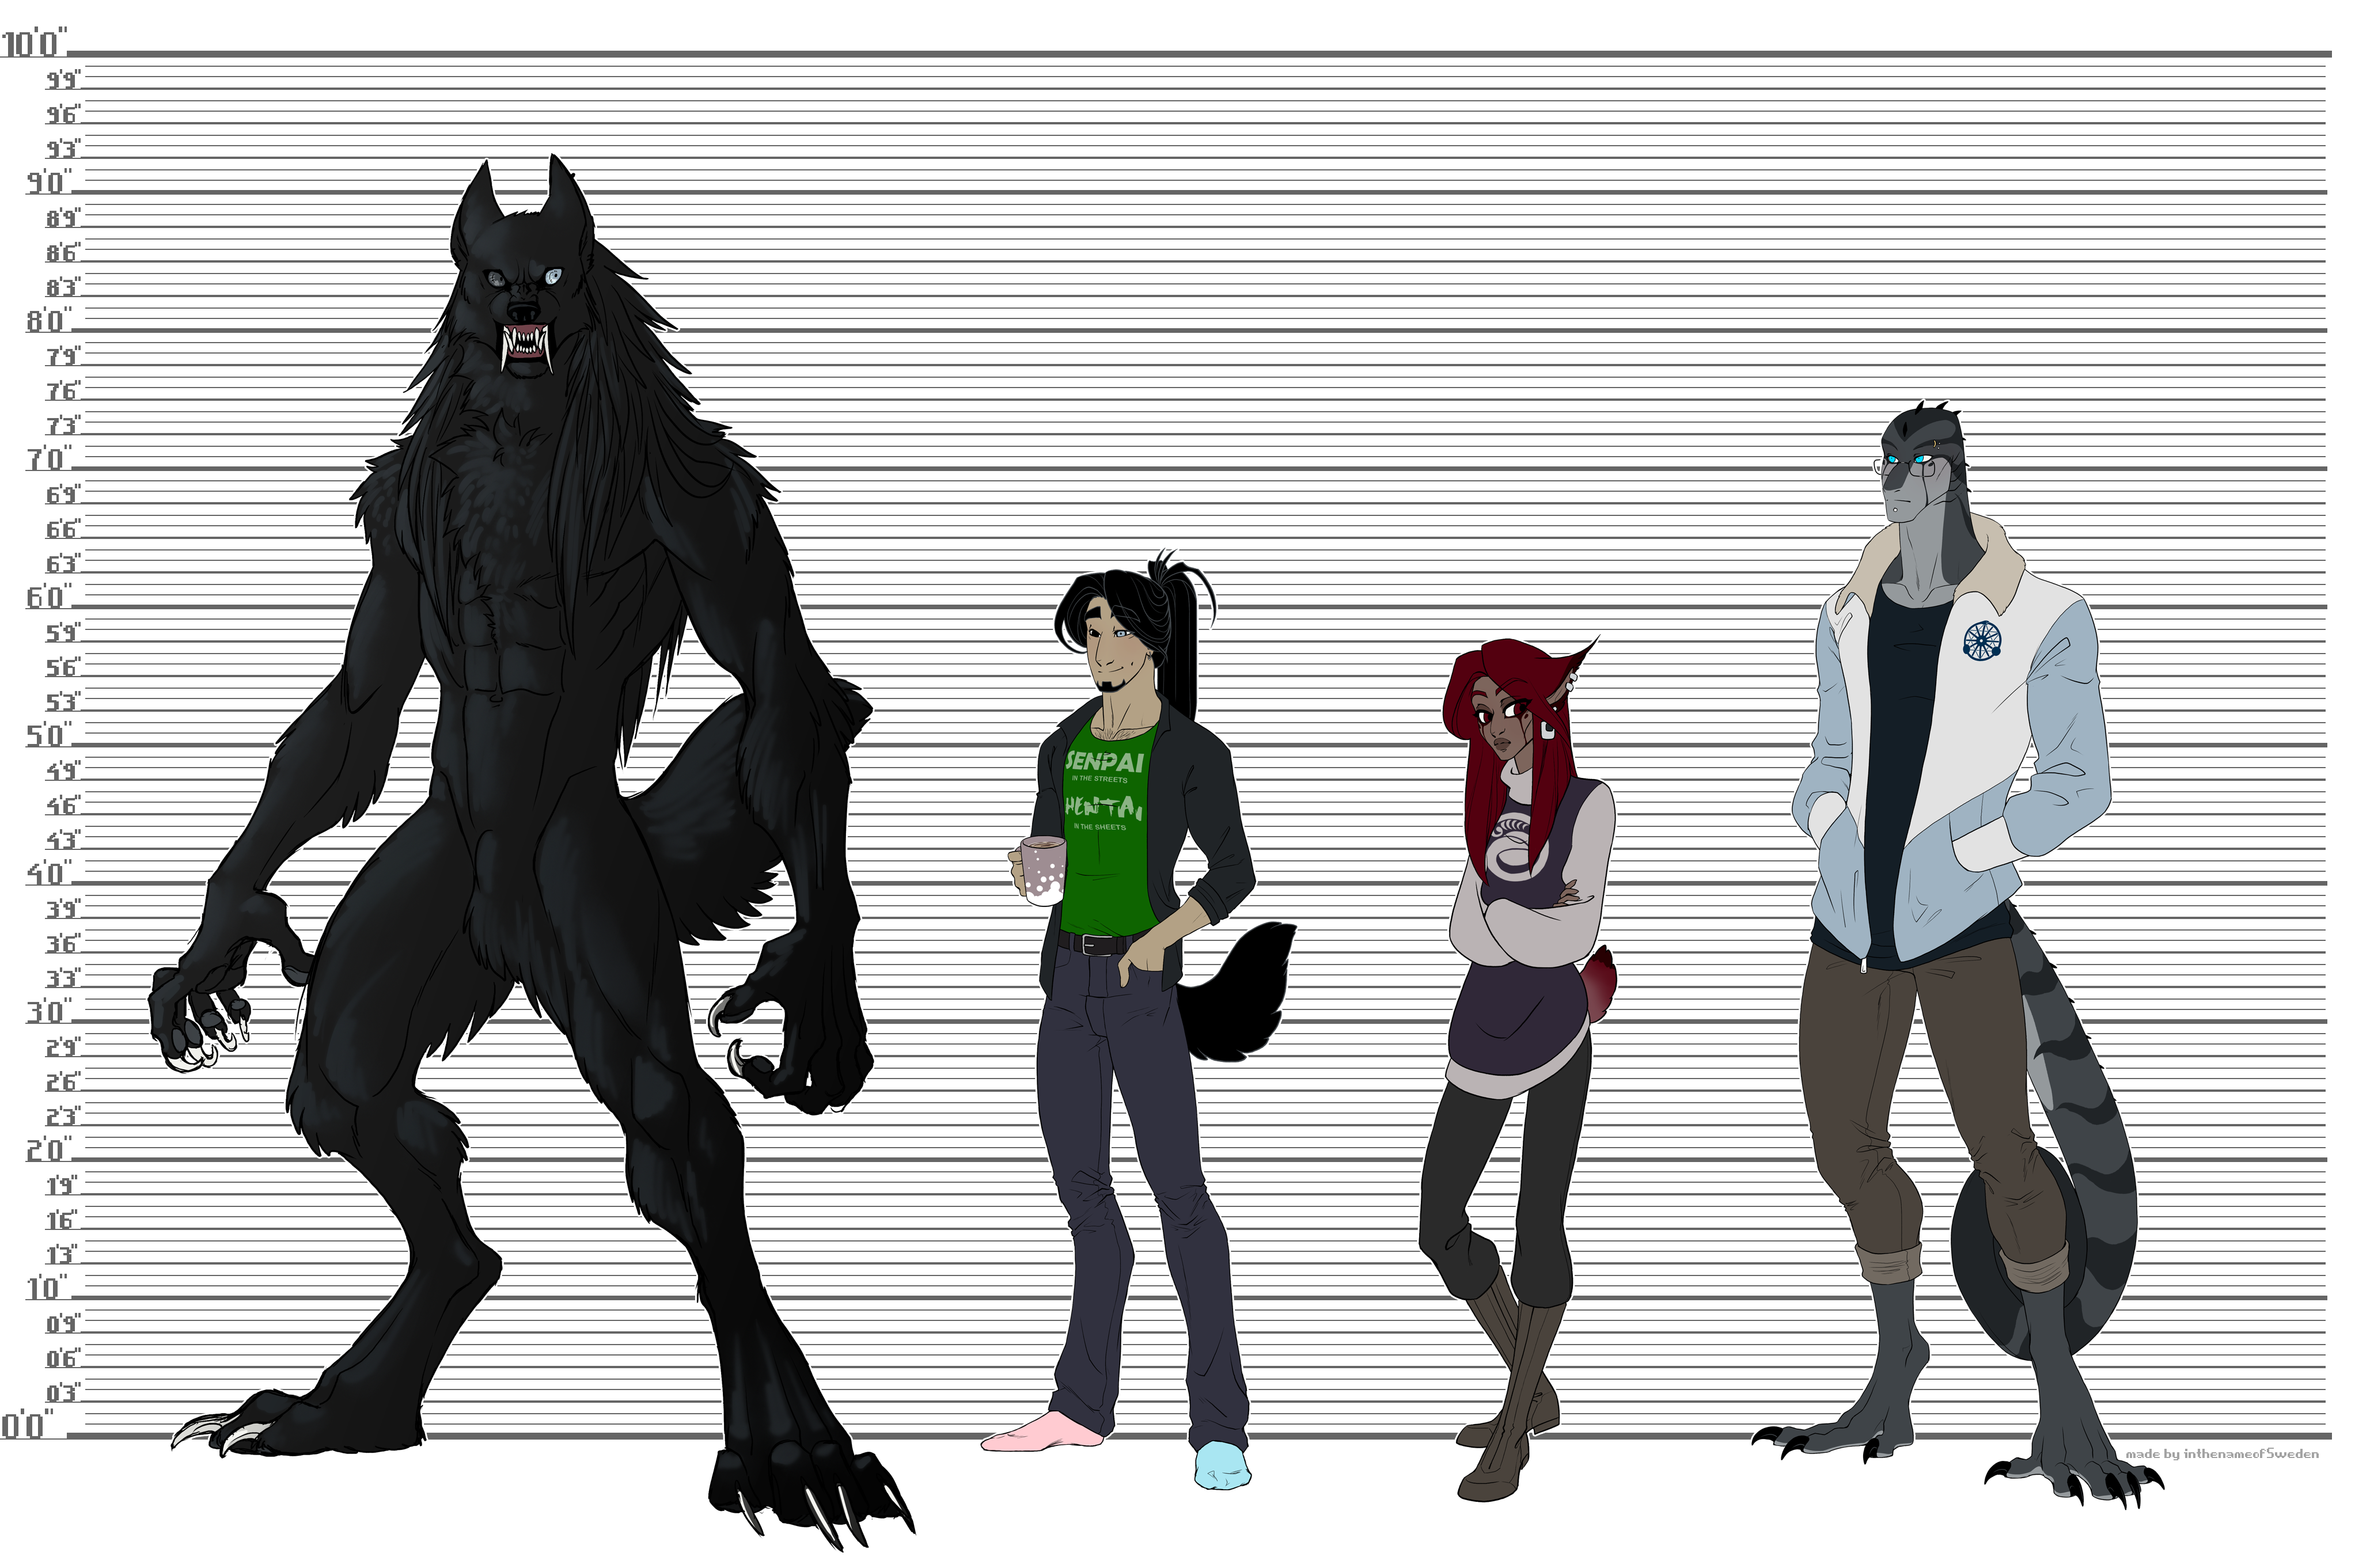 Height comparison chart